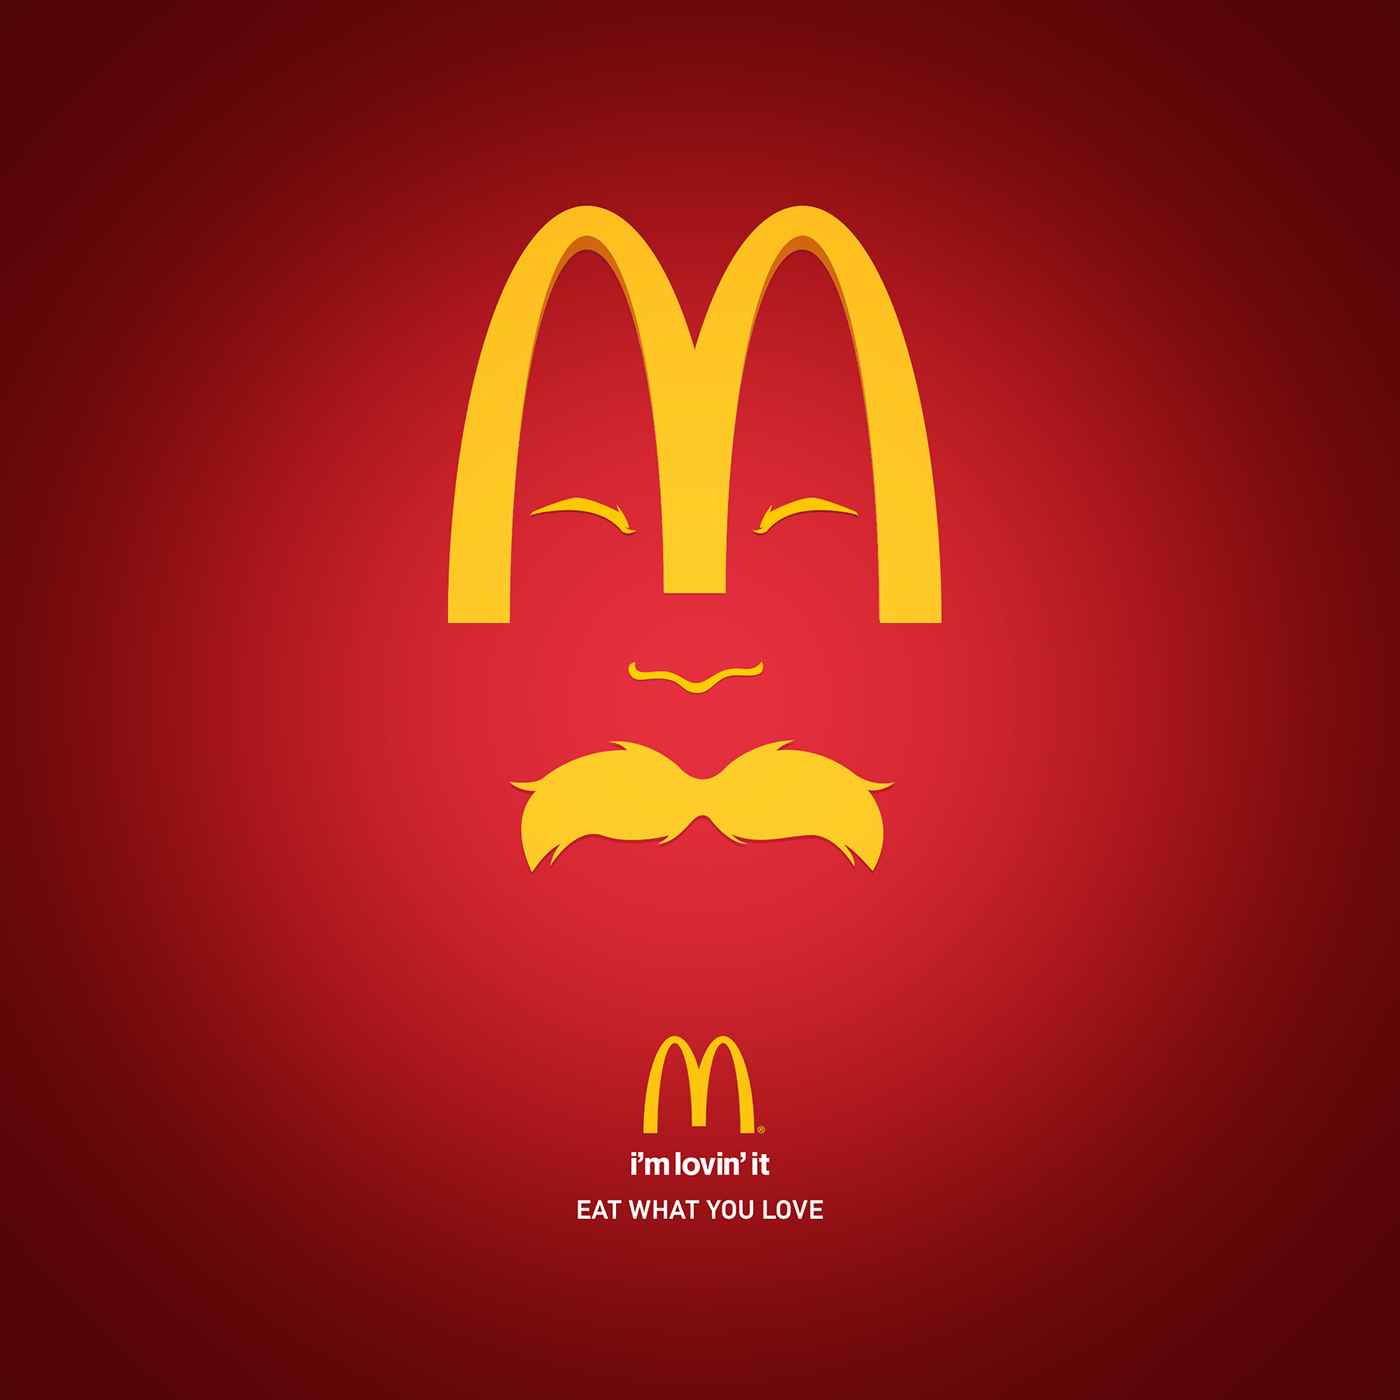 McDonalds creative ads ads face eat mcdonalds creative ad Packaging red burger packaging i'm lovin it